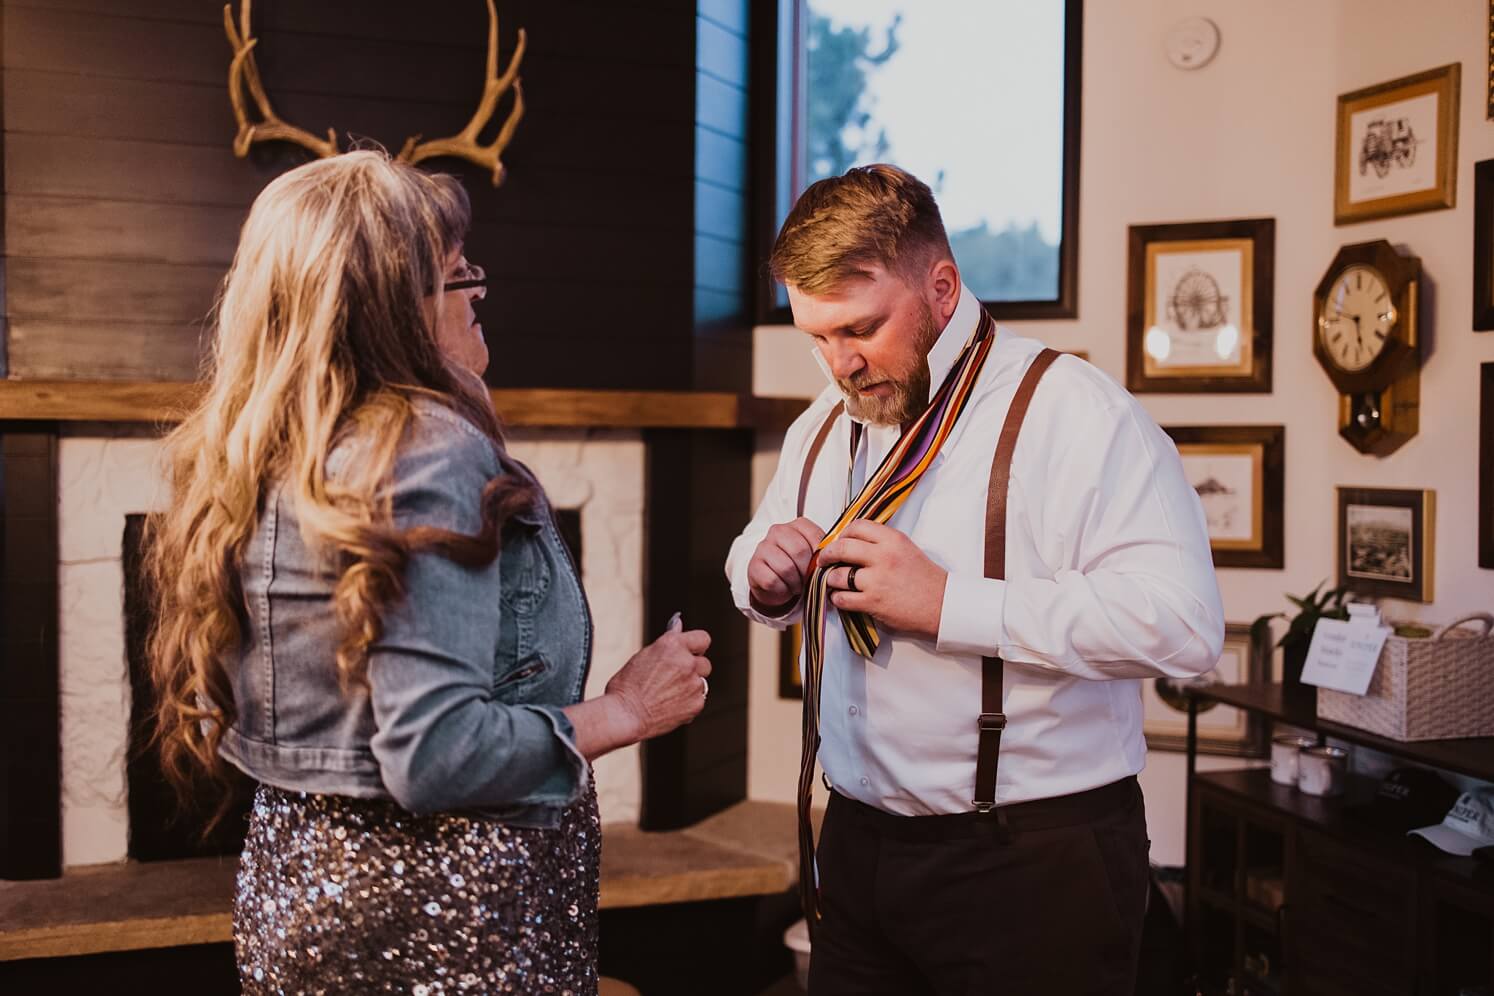 Groom putting on brother's tie during reception | McArthur Weddings and Events